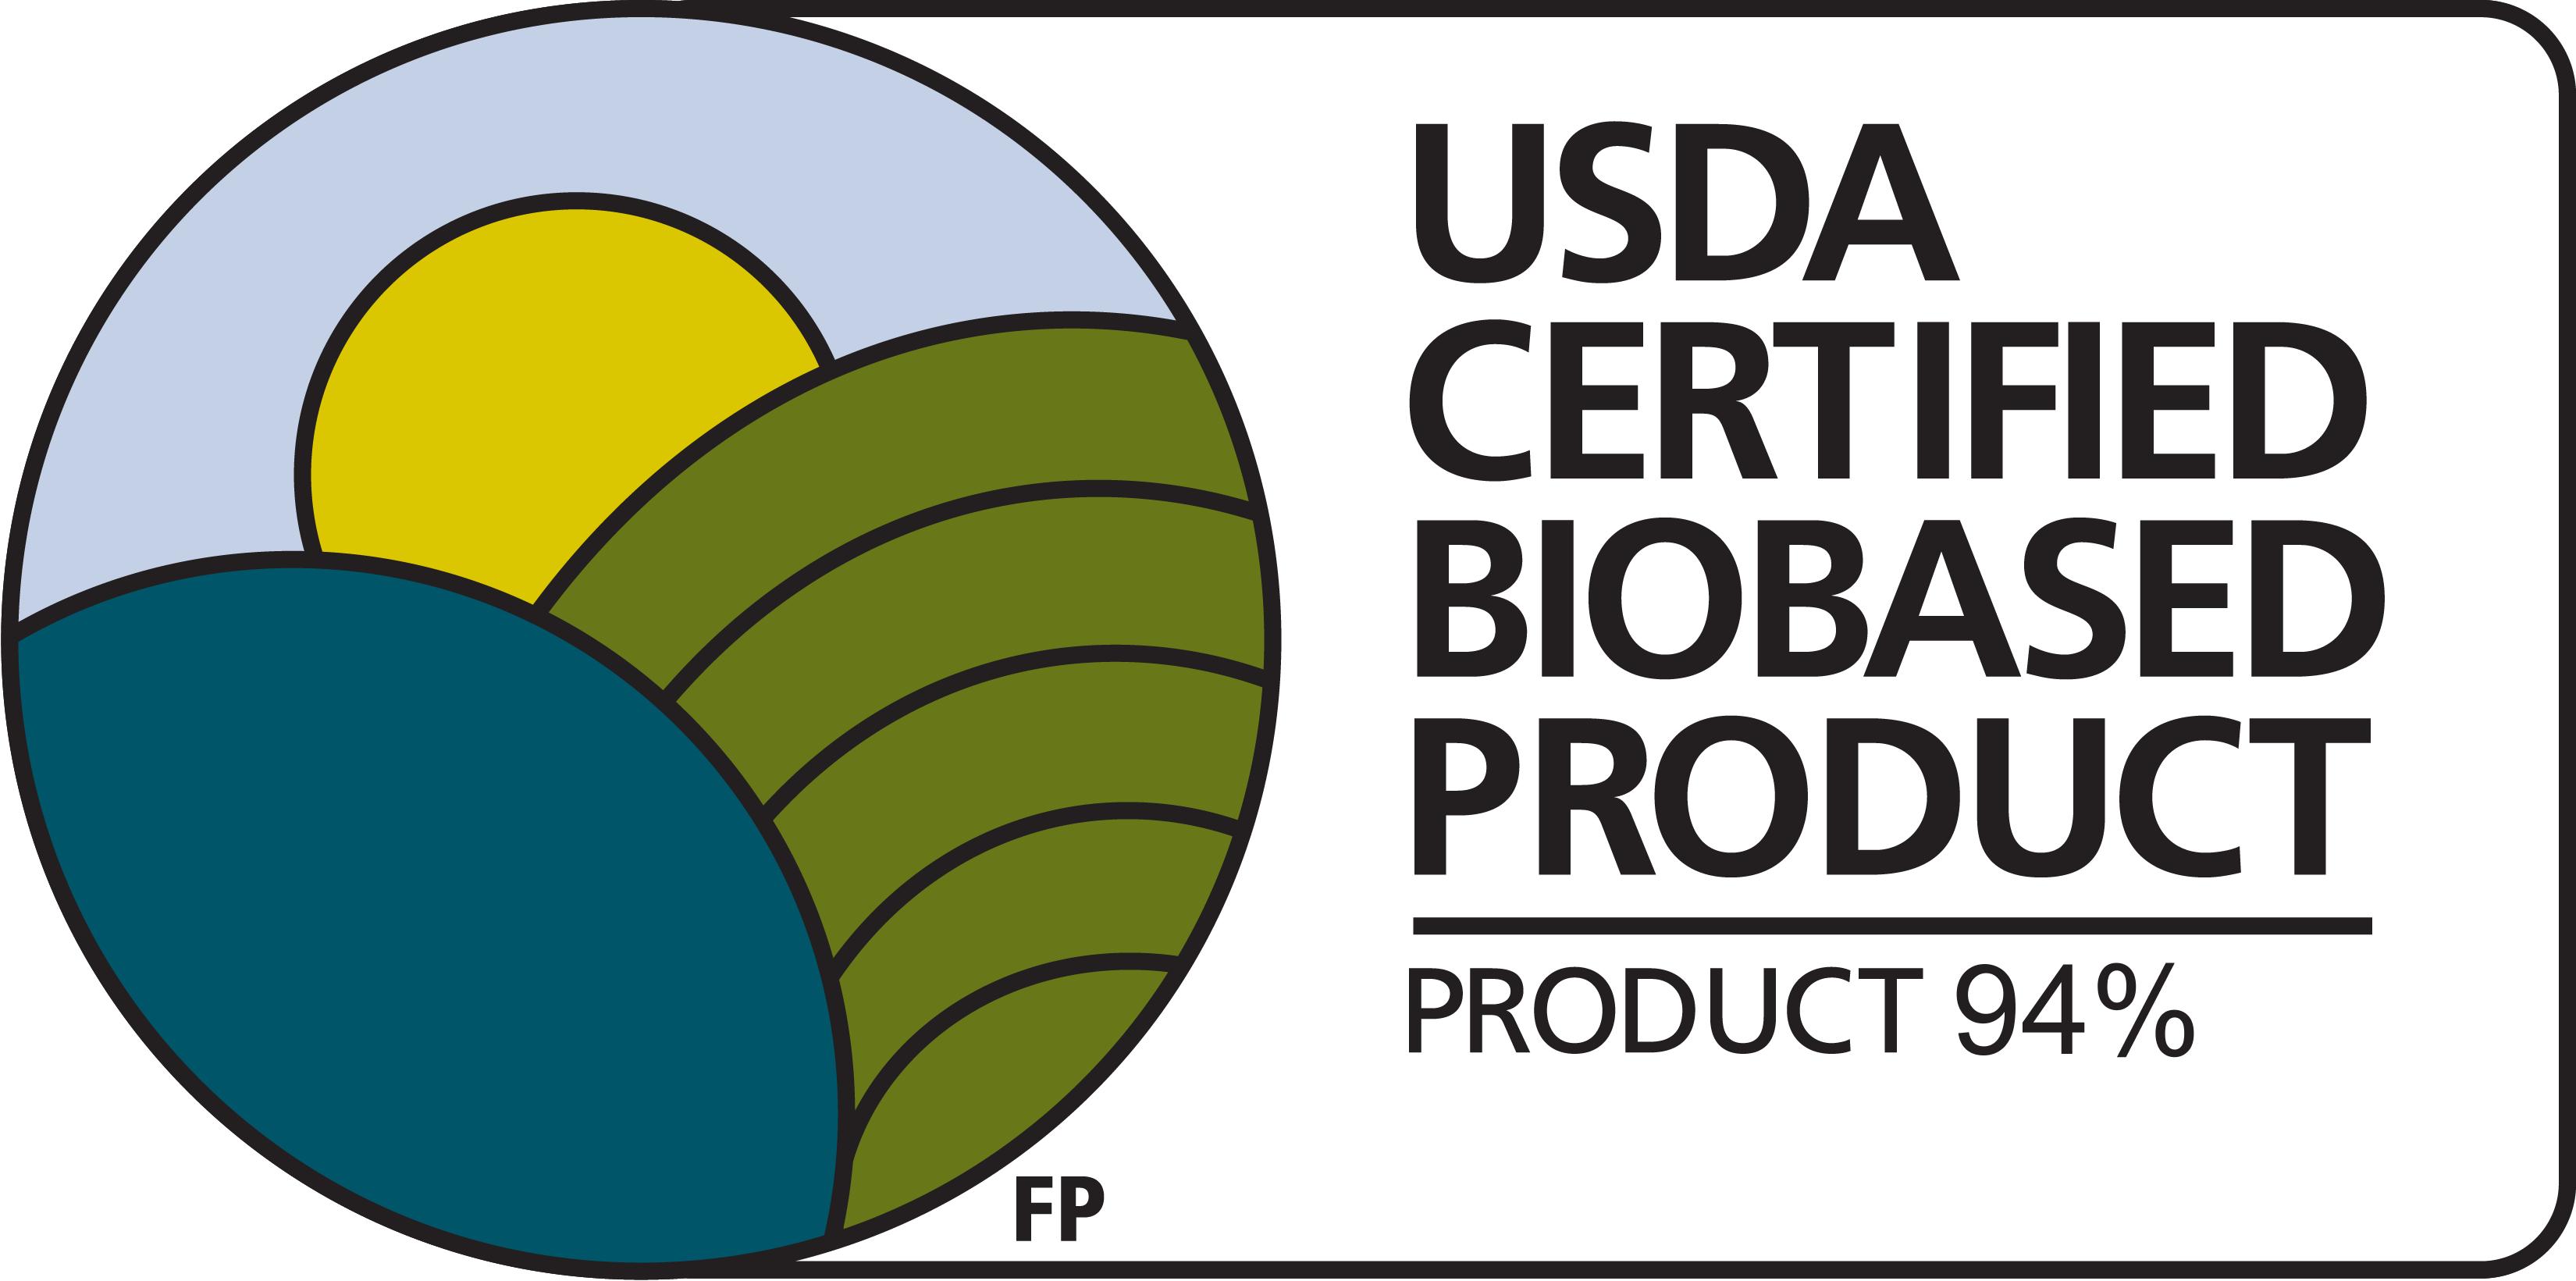 This label is estimated to be on certified products and available for consumers by June 18, 2014.